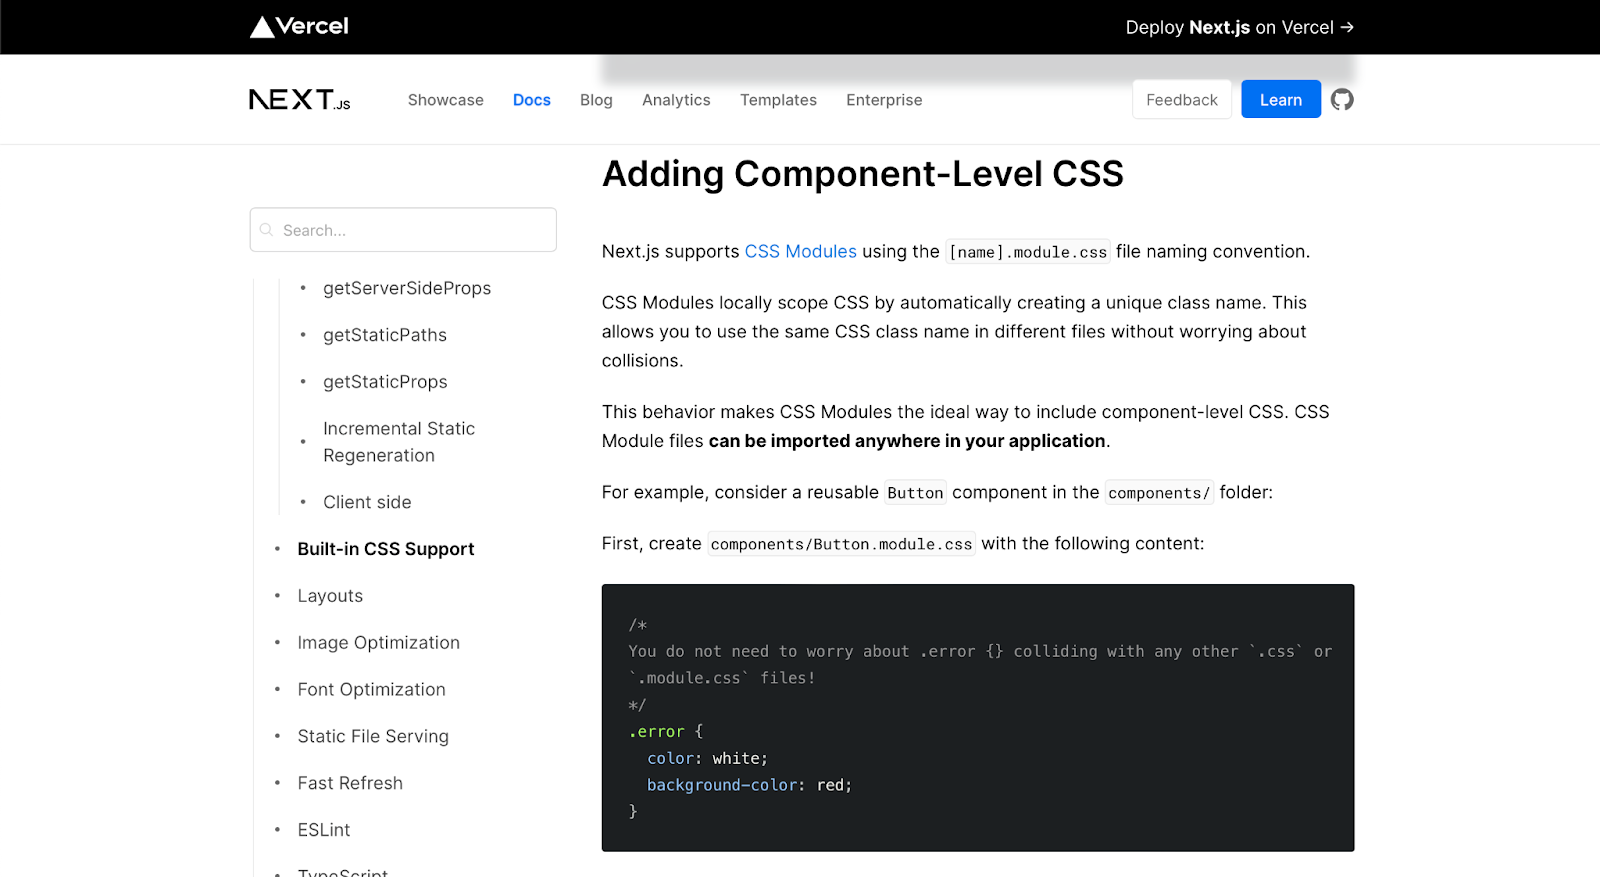 Built-In CSS Support